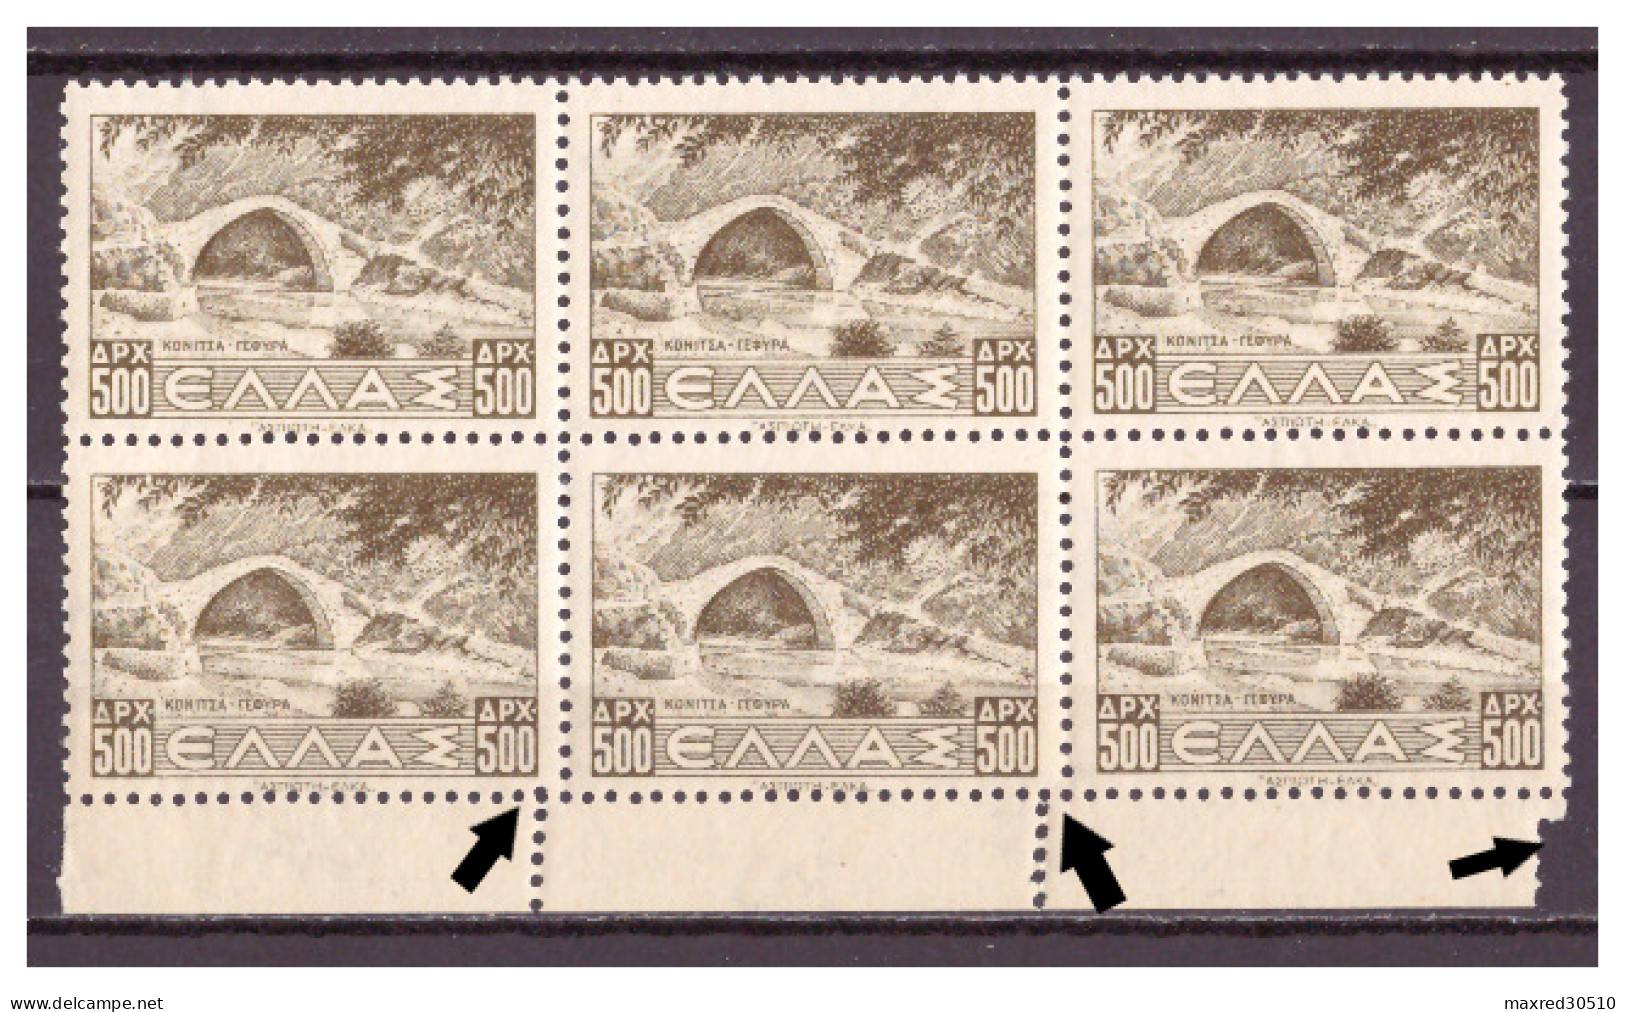 GREECE 1942 - 44 BLOCK OF 6X500DR. OF "LANDSCAPES ISSUE" WITH PRINTING ERRORS AT THE VERTICAL PERFO OF MARGIN SHEET MNH - Errors, Freaks & Oddities (EFO)